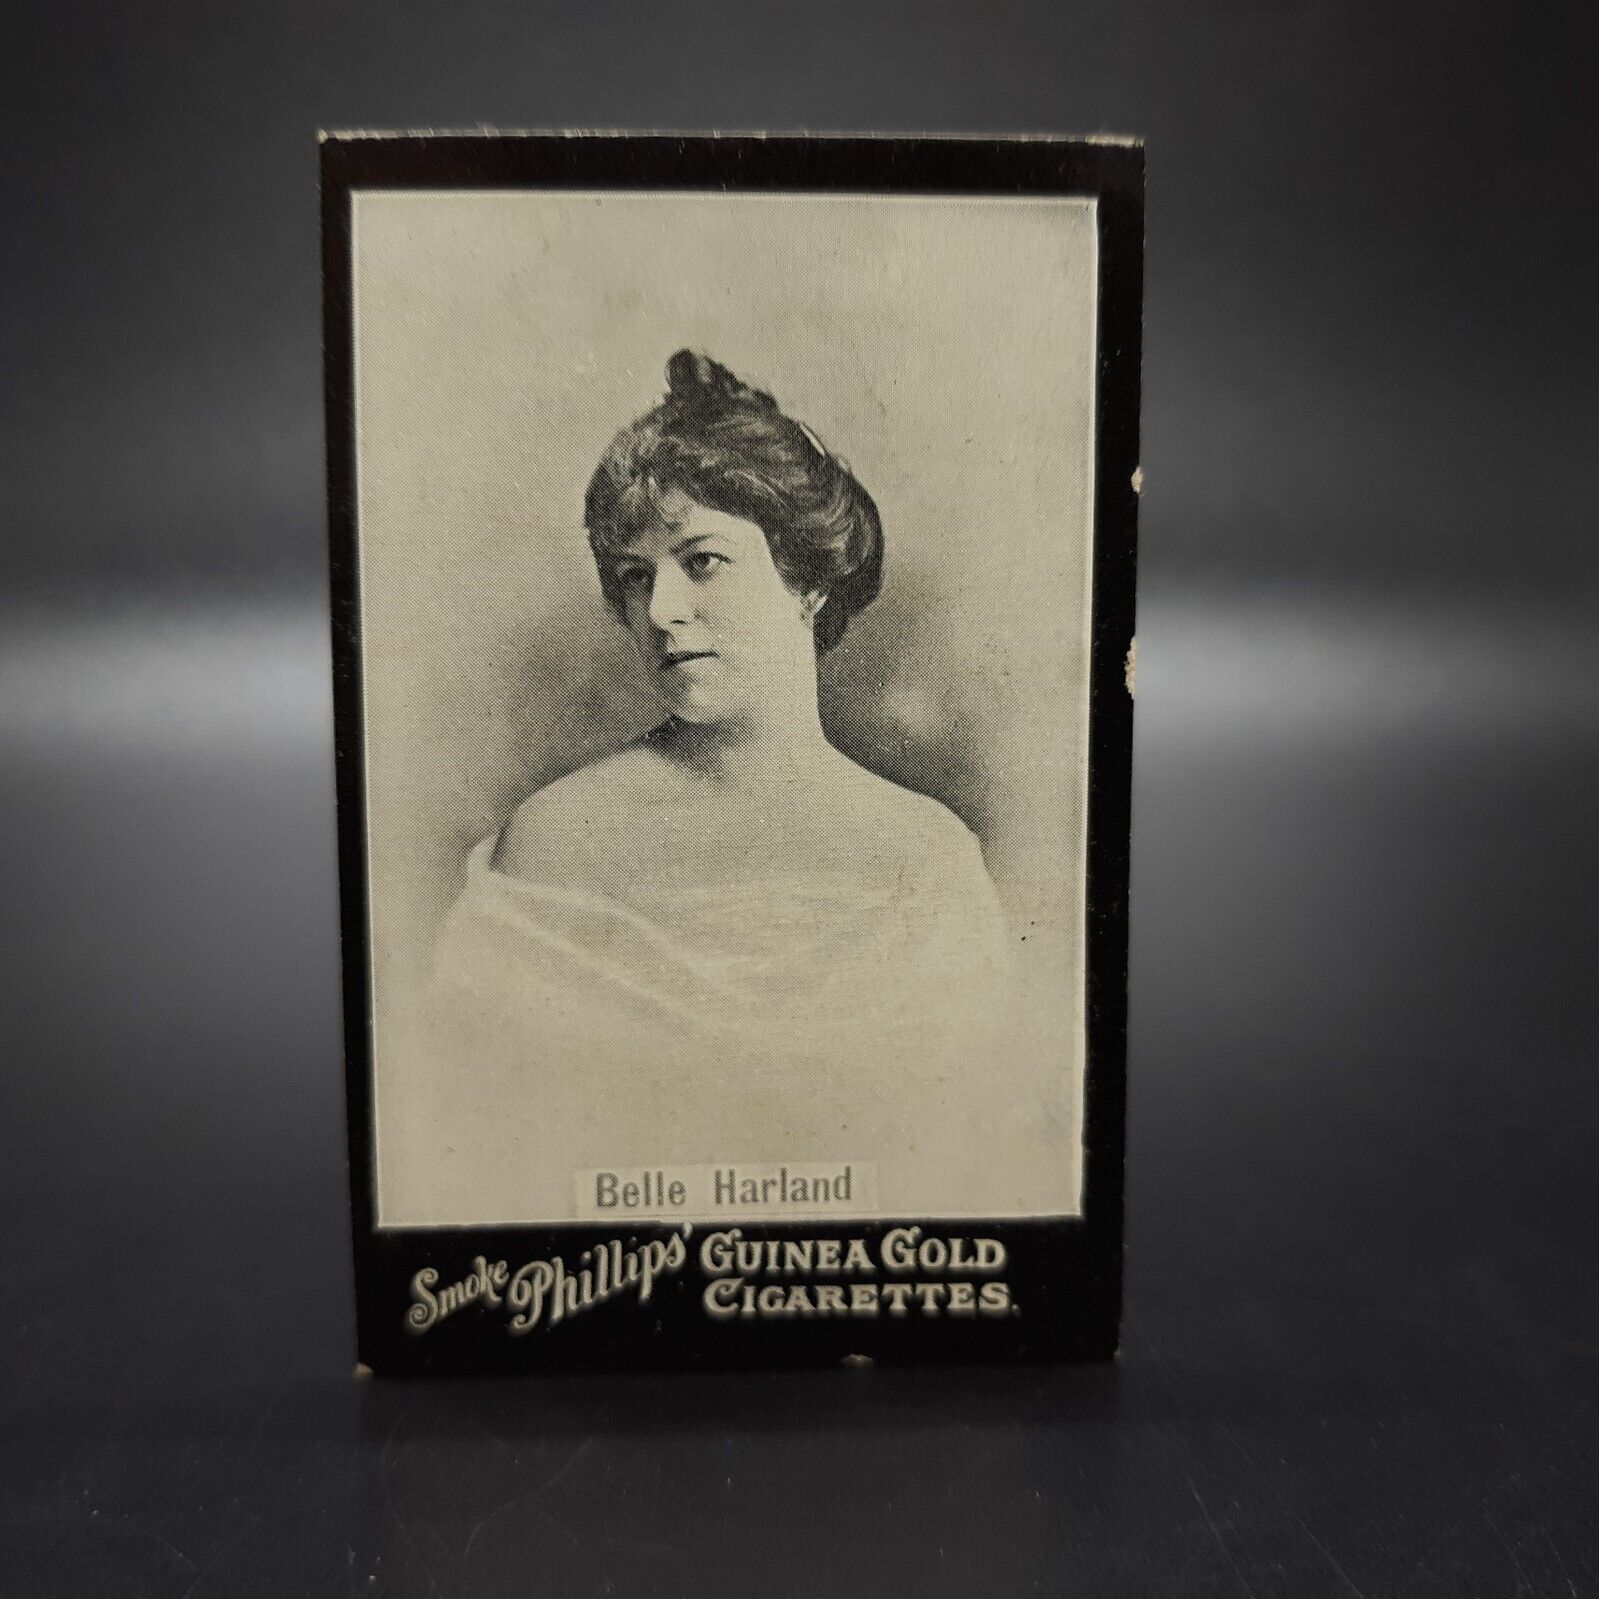 1899 Philips Guinea Gold Actress Belle Harland Antique Tobacco Cigarette Card